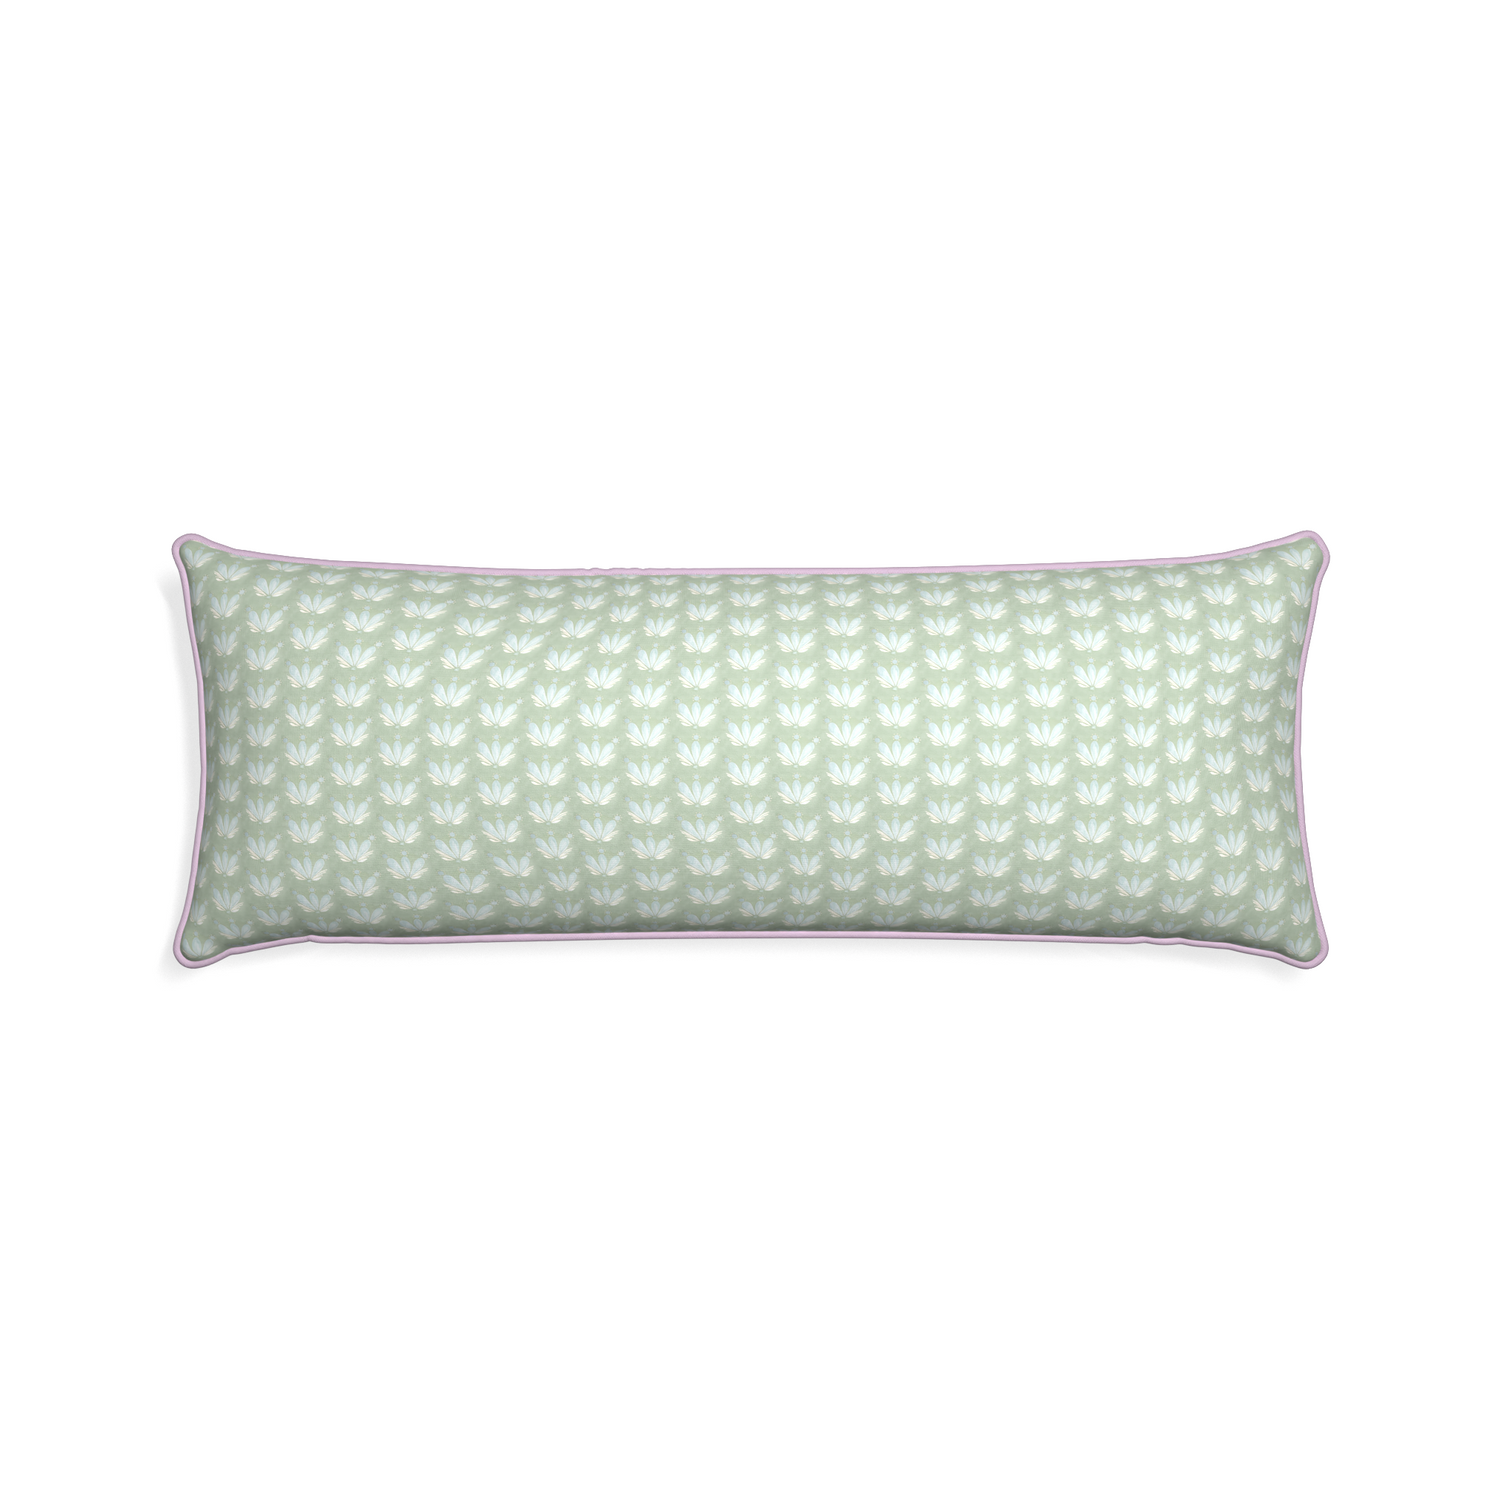 Xl-lumbar serena sea salt custom blue & green floral drop repeatpillow with l piping on white background